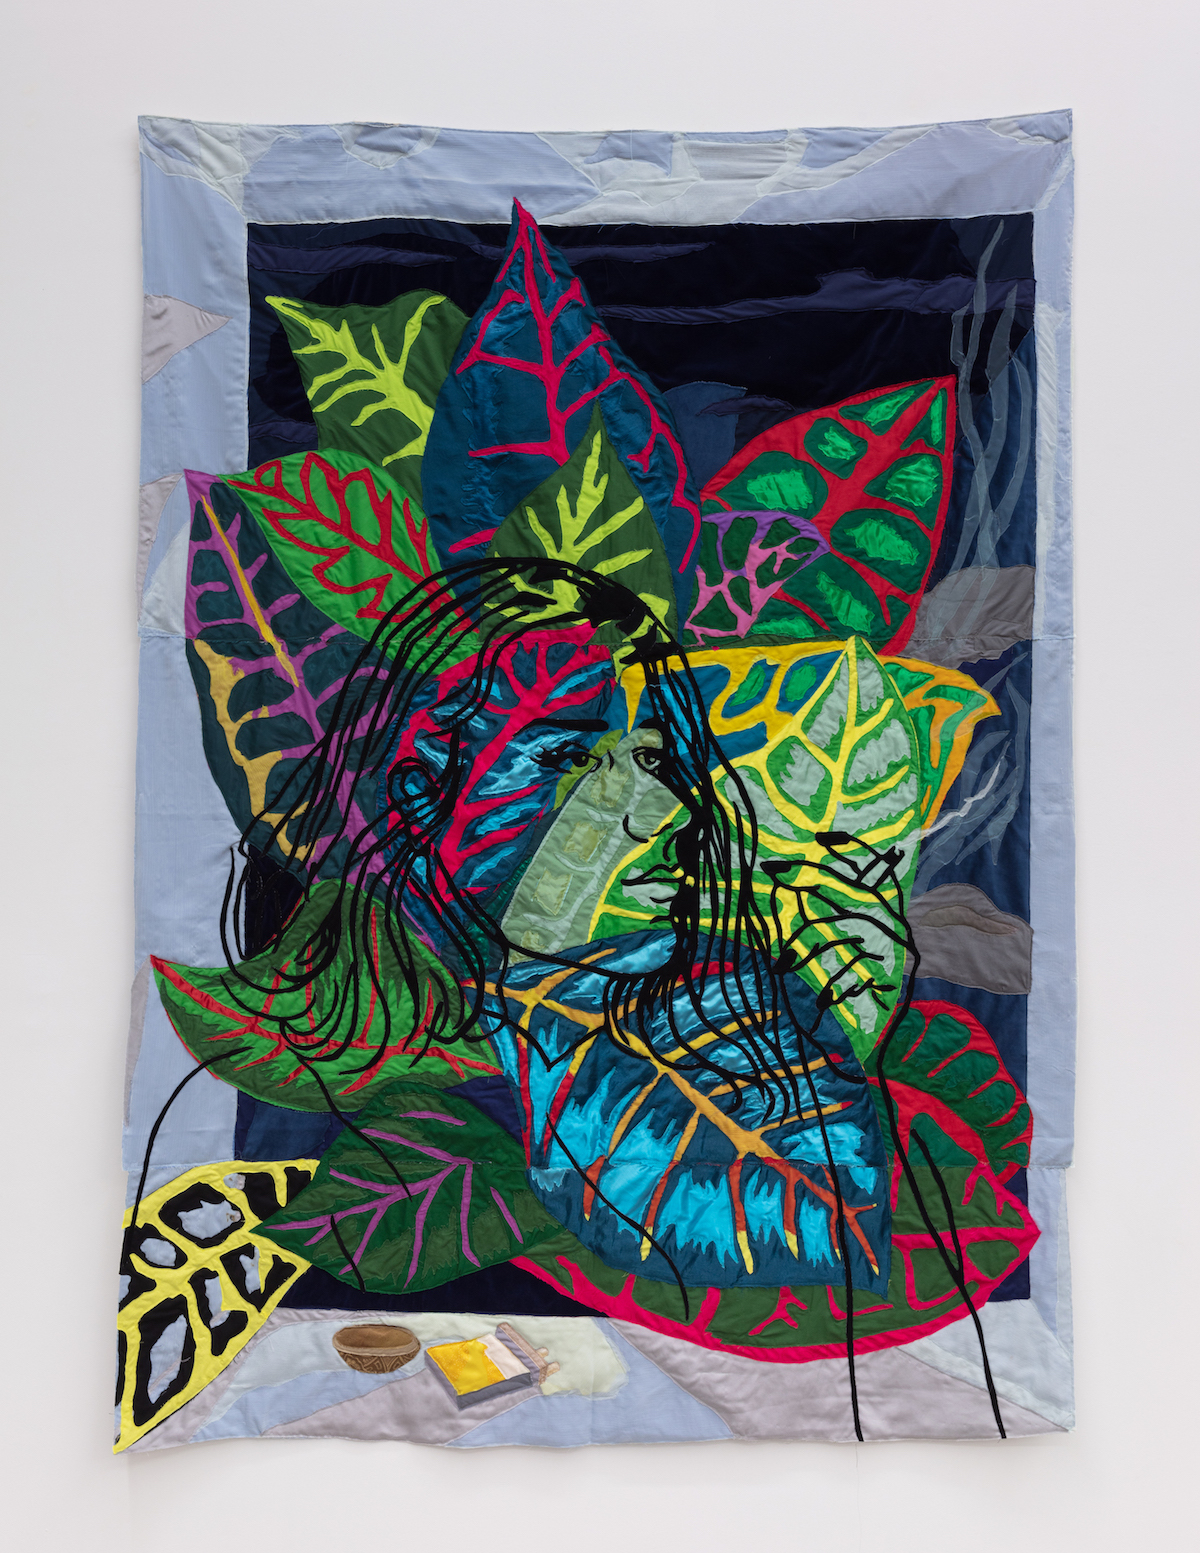 Self-portrait with the Croton Petra Plants, 2021, Chiffon, muslin, cotton, polyester, silk, velvet, net mesh, color pencil, and found fabric, 80 x 58 in
Courtesy of Cooper Cole, Toronto